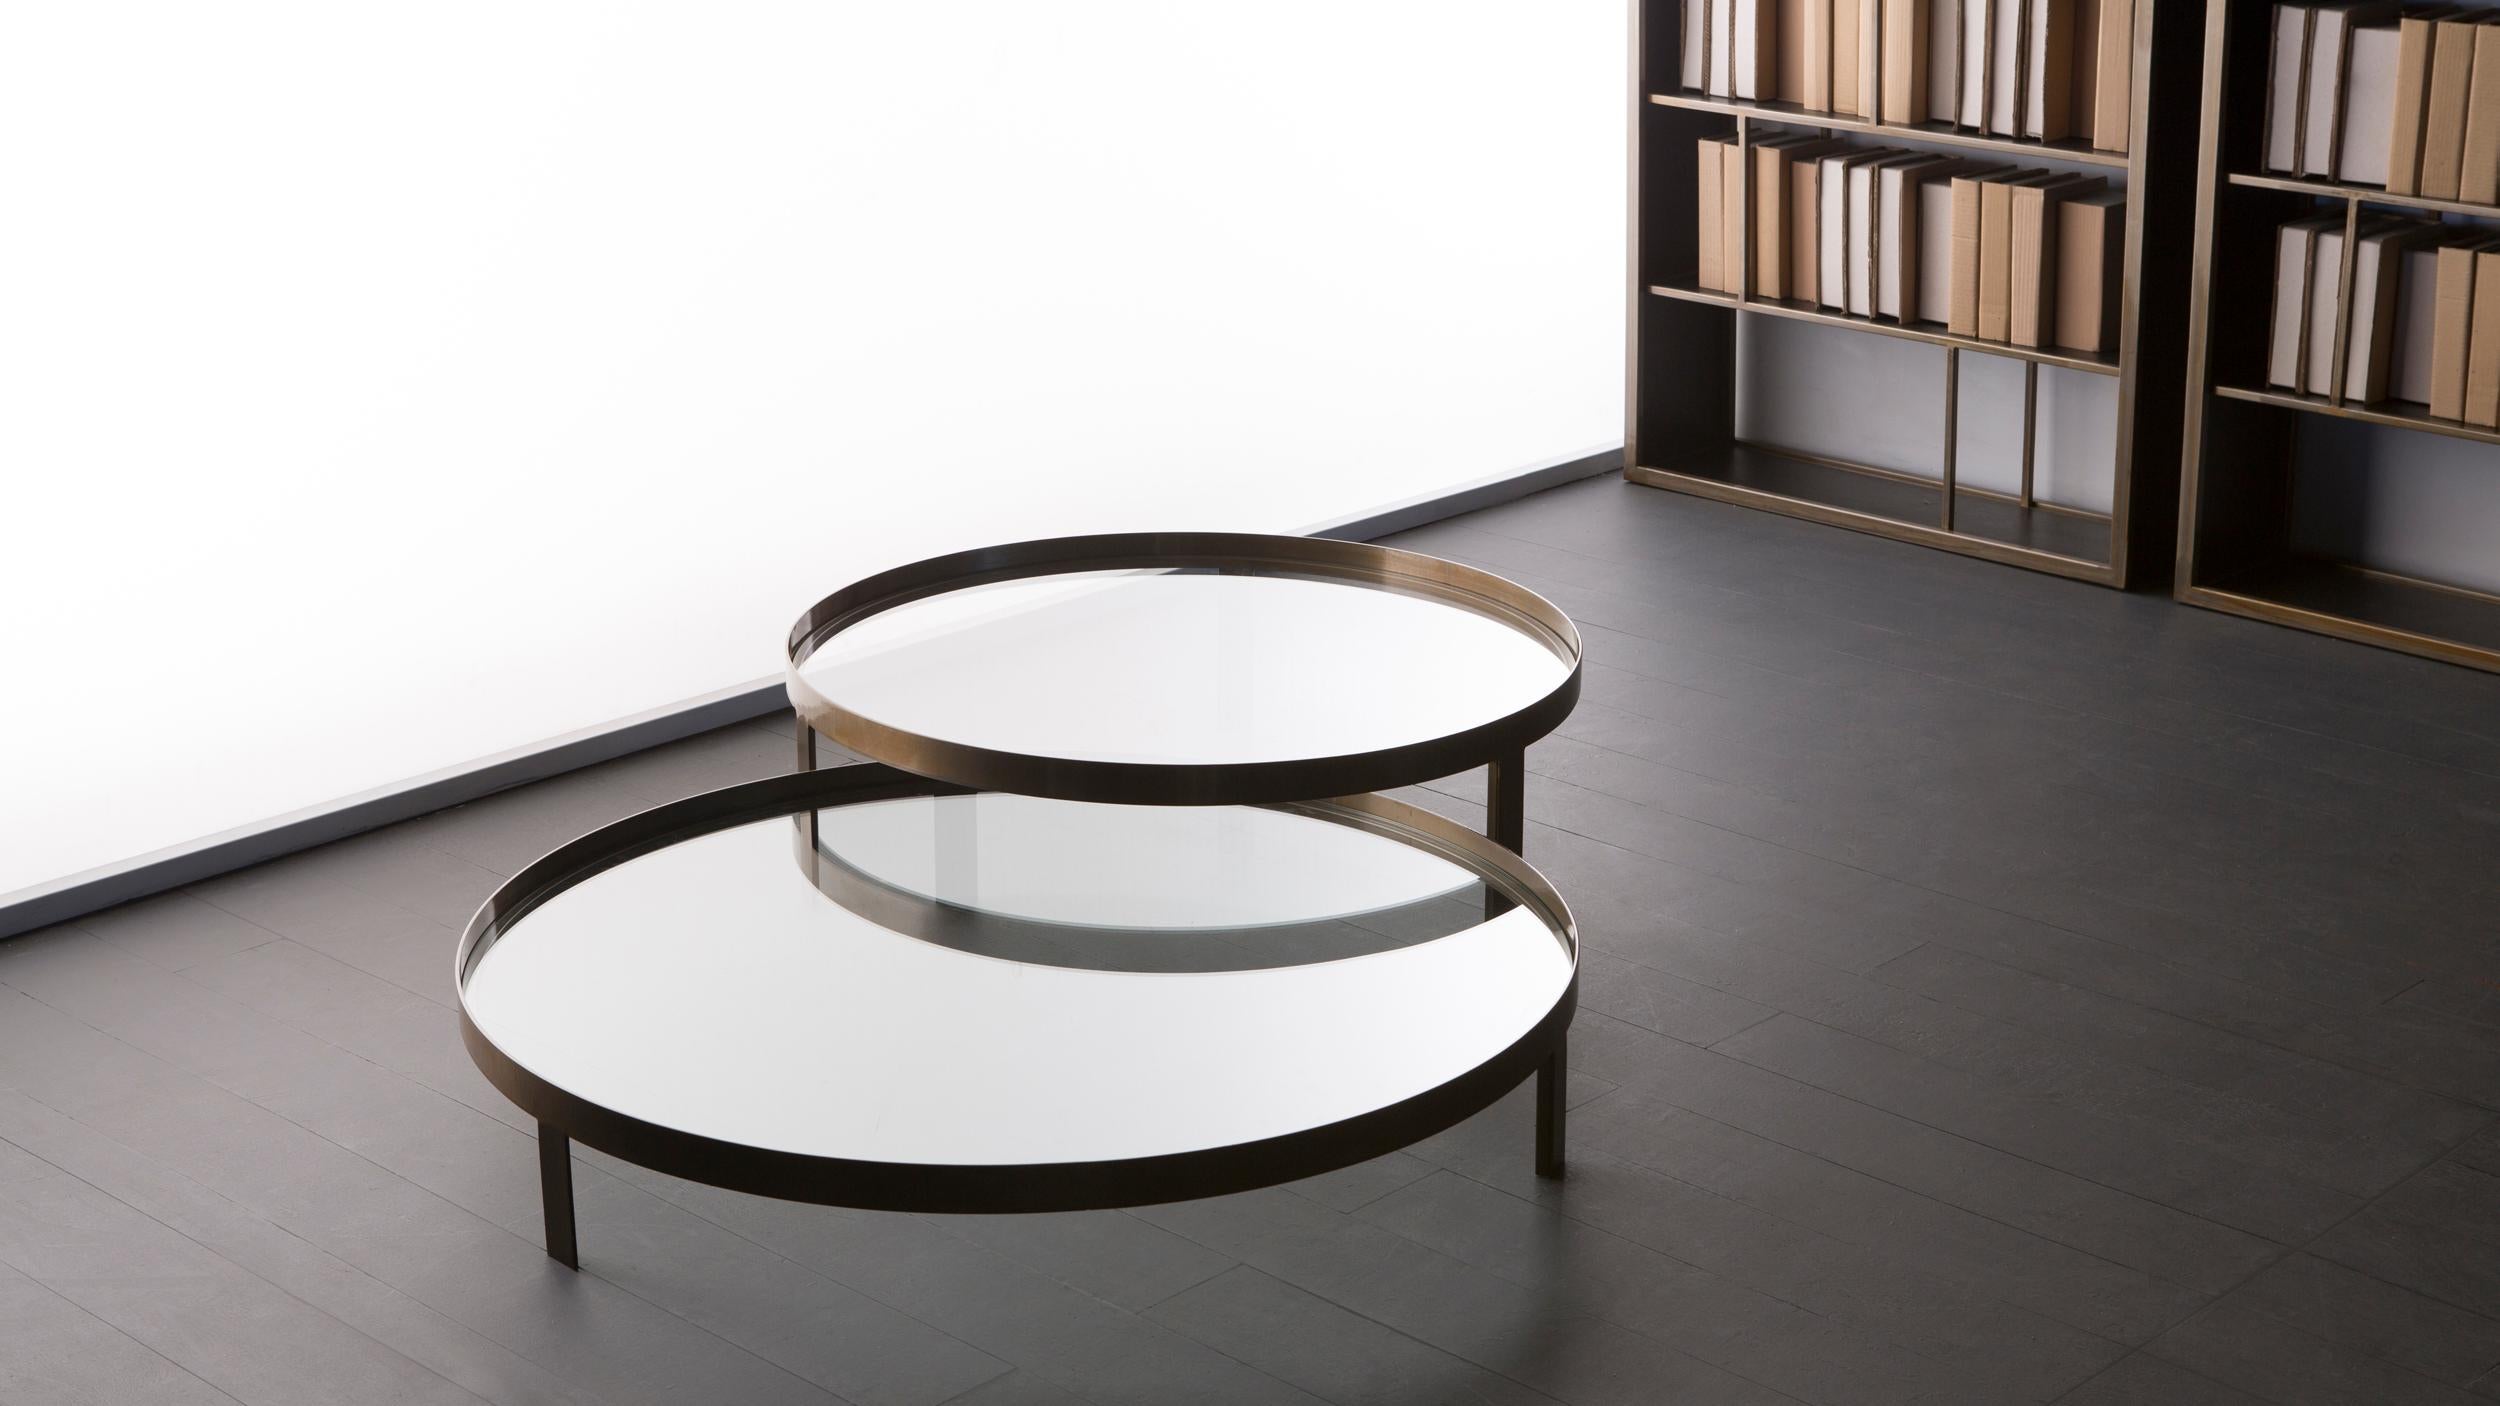 Tao Coffee Table by Doimo Brasil
Dimensions:  D 100 x H 20 cm 
Materials: Base: Veneer, Top: clear glass 8mm.

Also available in D 100 x H 30, D 120 x H 20, D 120 x H 30 cm. Please contact us. 

With the intention of providing good taste and